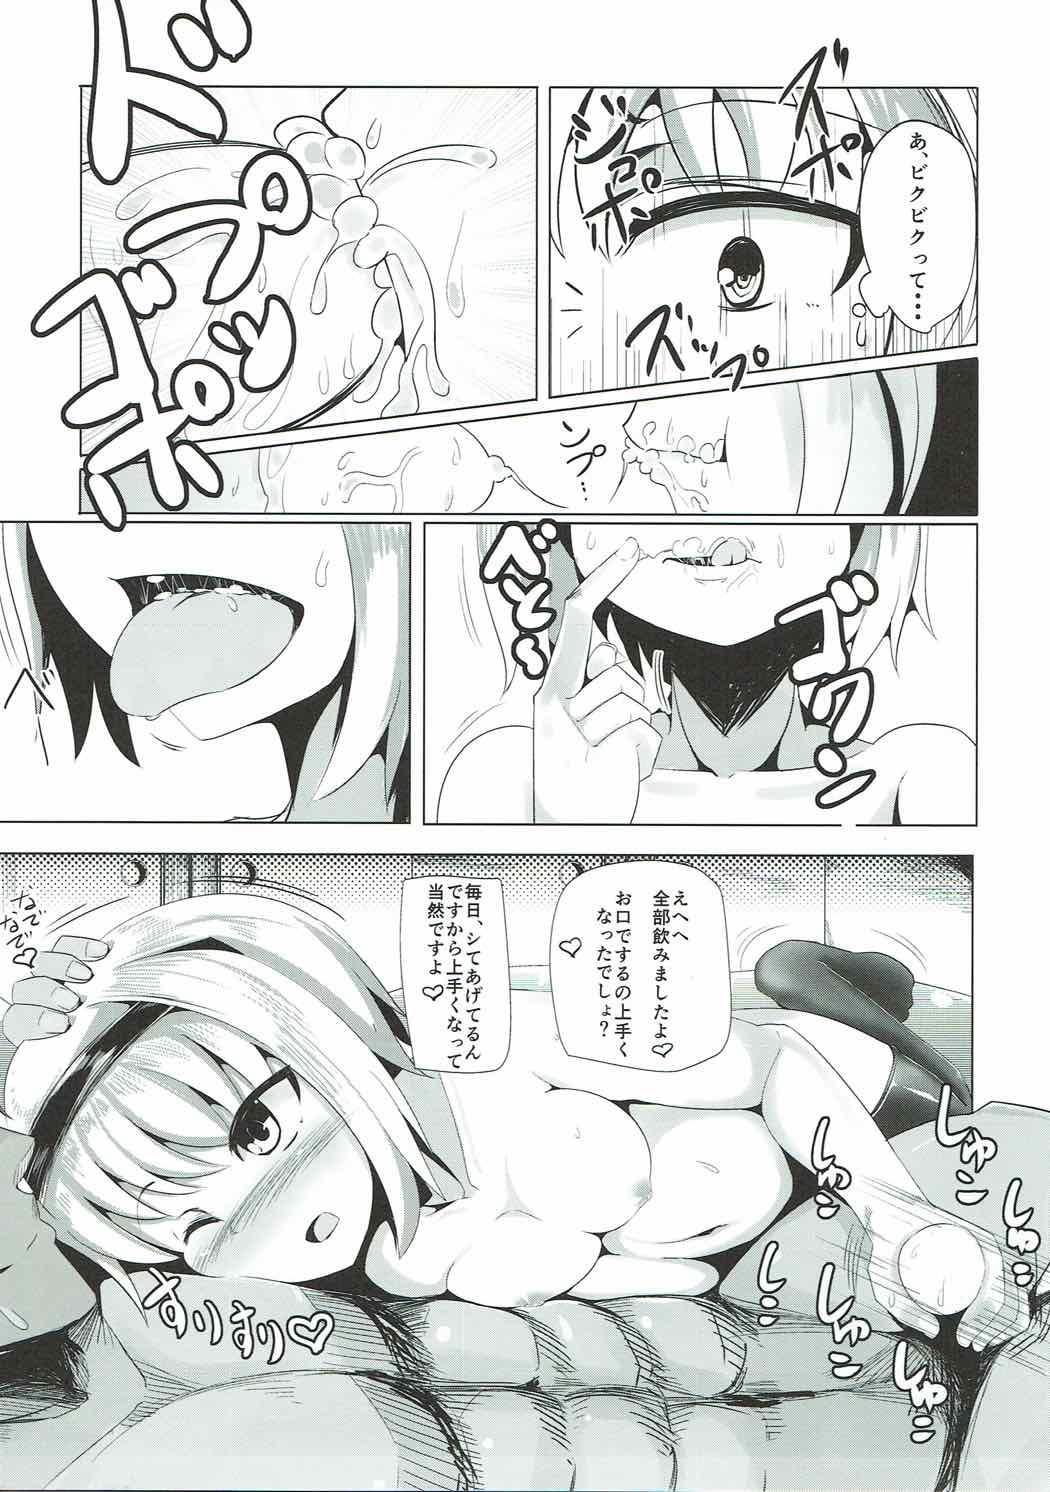 Bald Pussy Youmux - Touhou project Eating Pussy - Page 10